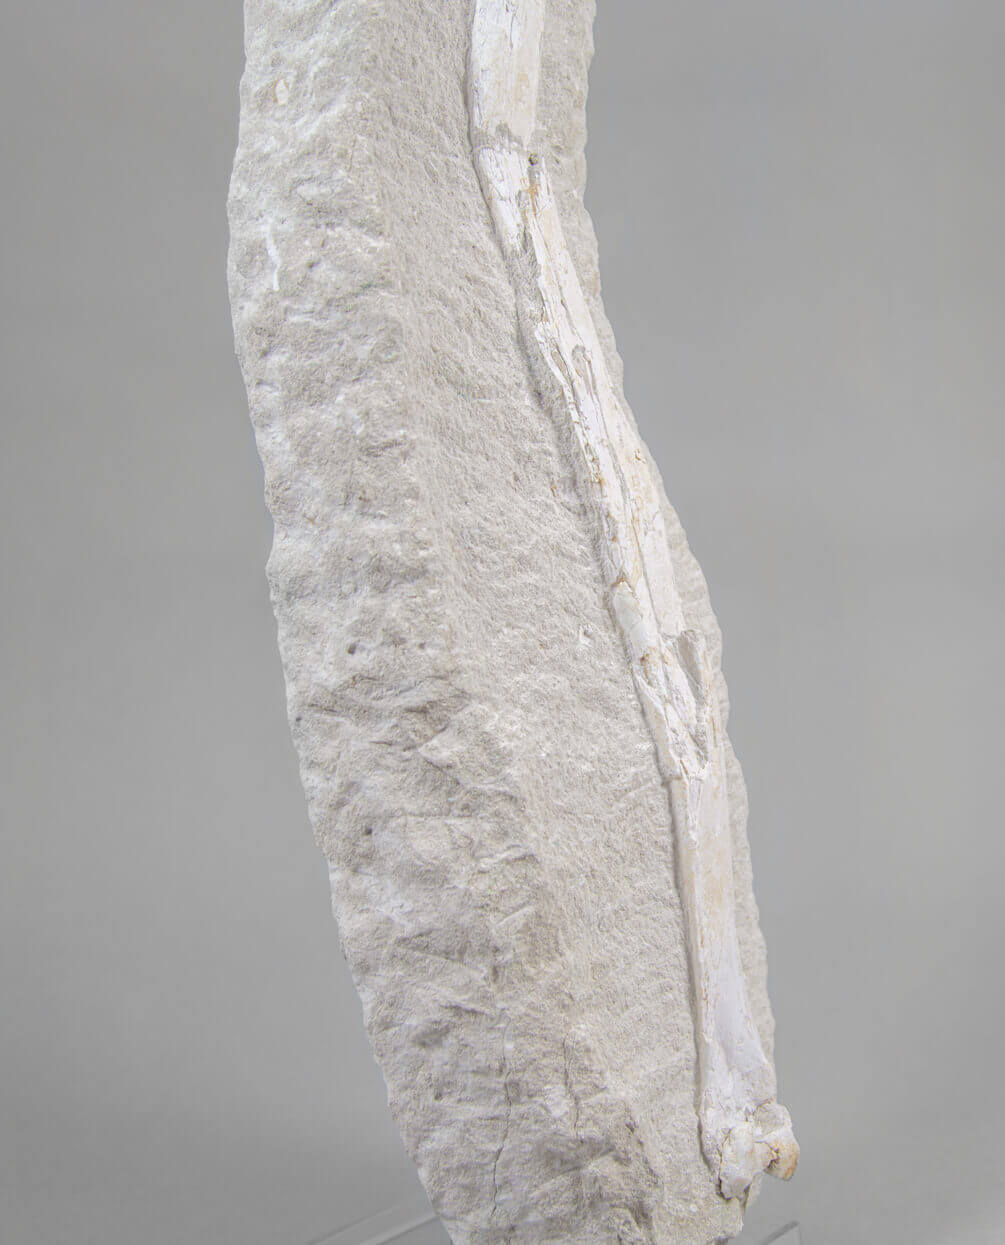 A museum-standard rare fossil Odontopteryx gigas bird bone for sale measuring 1.7 feet at THE FOSSIL STORE